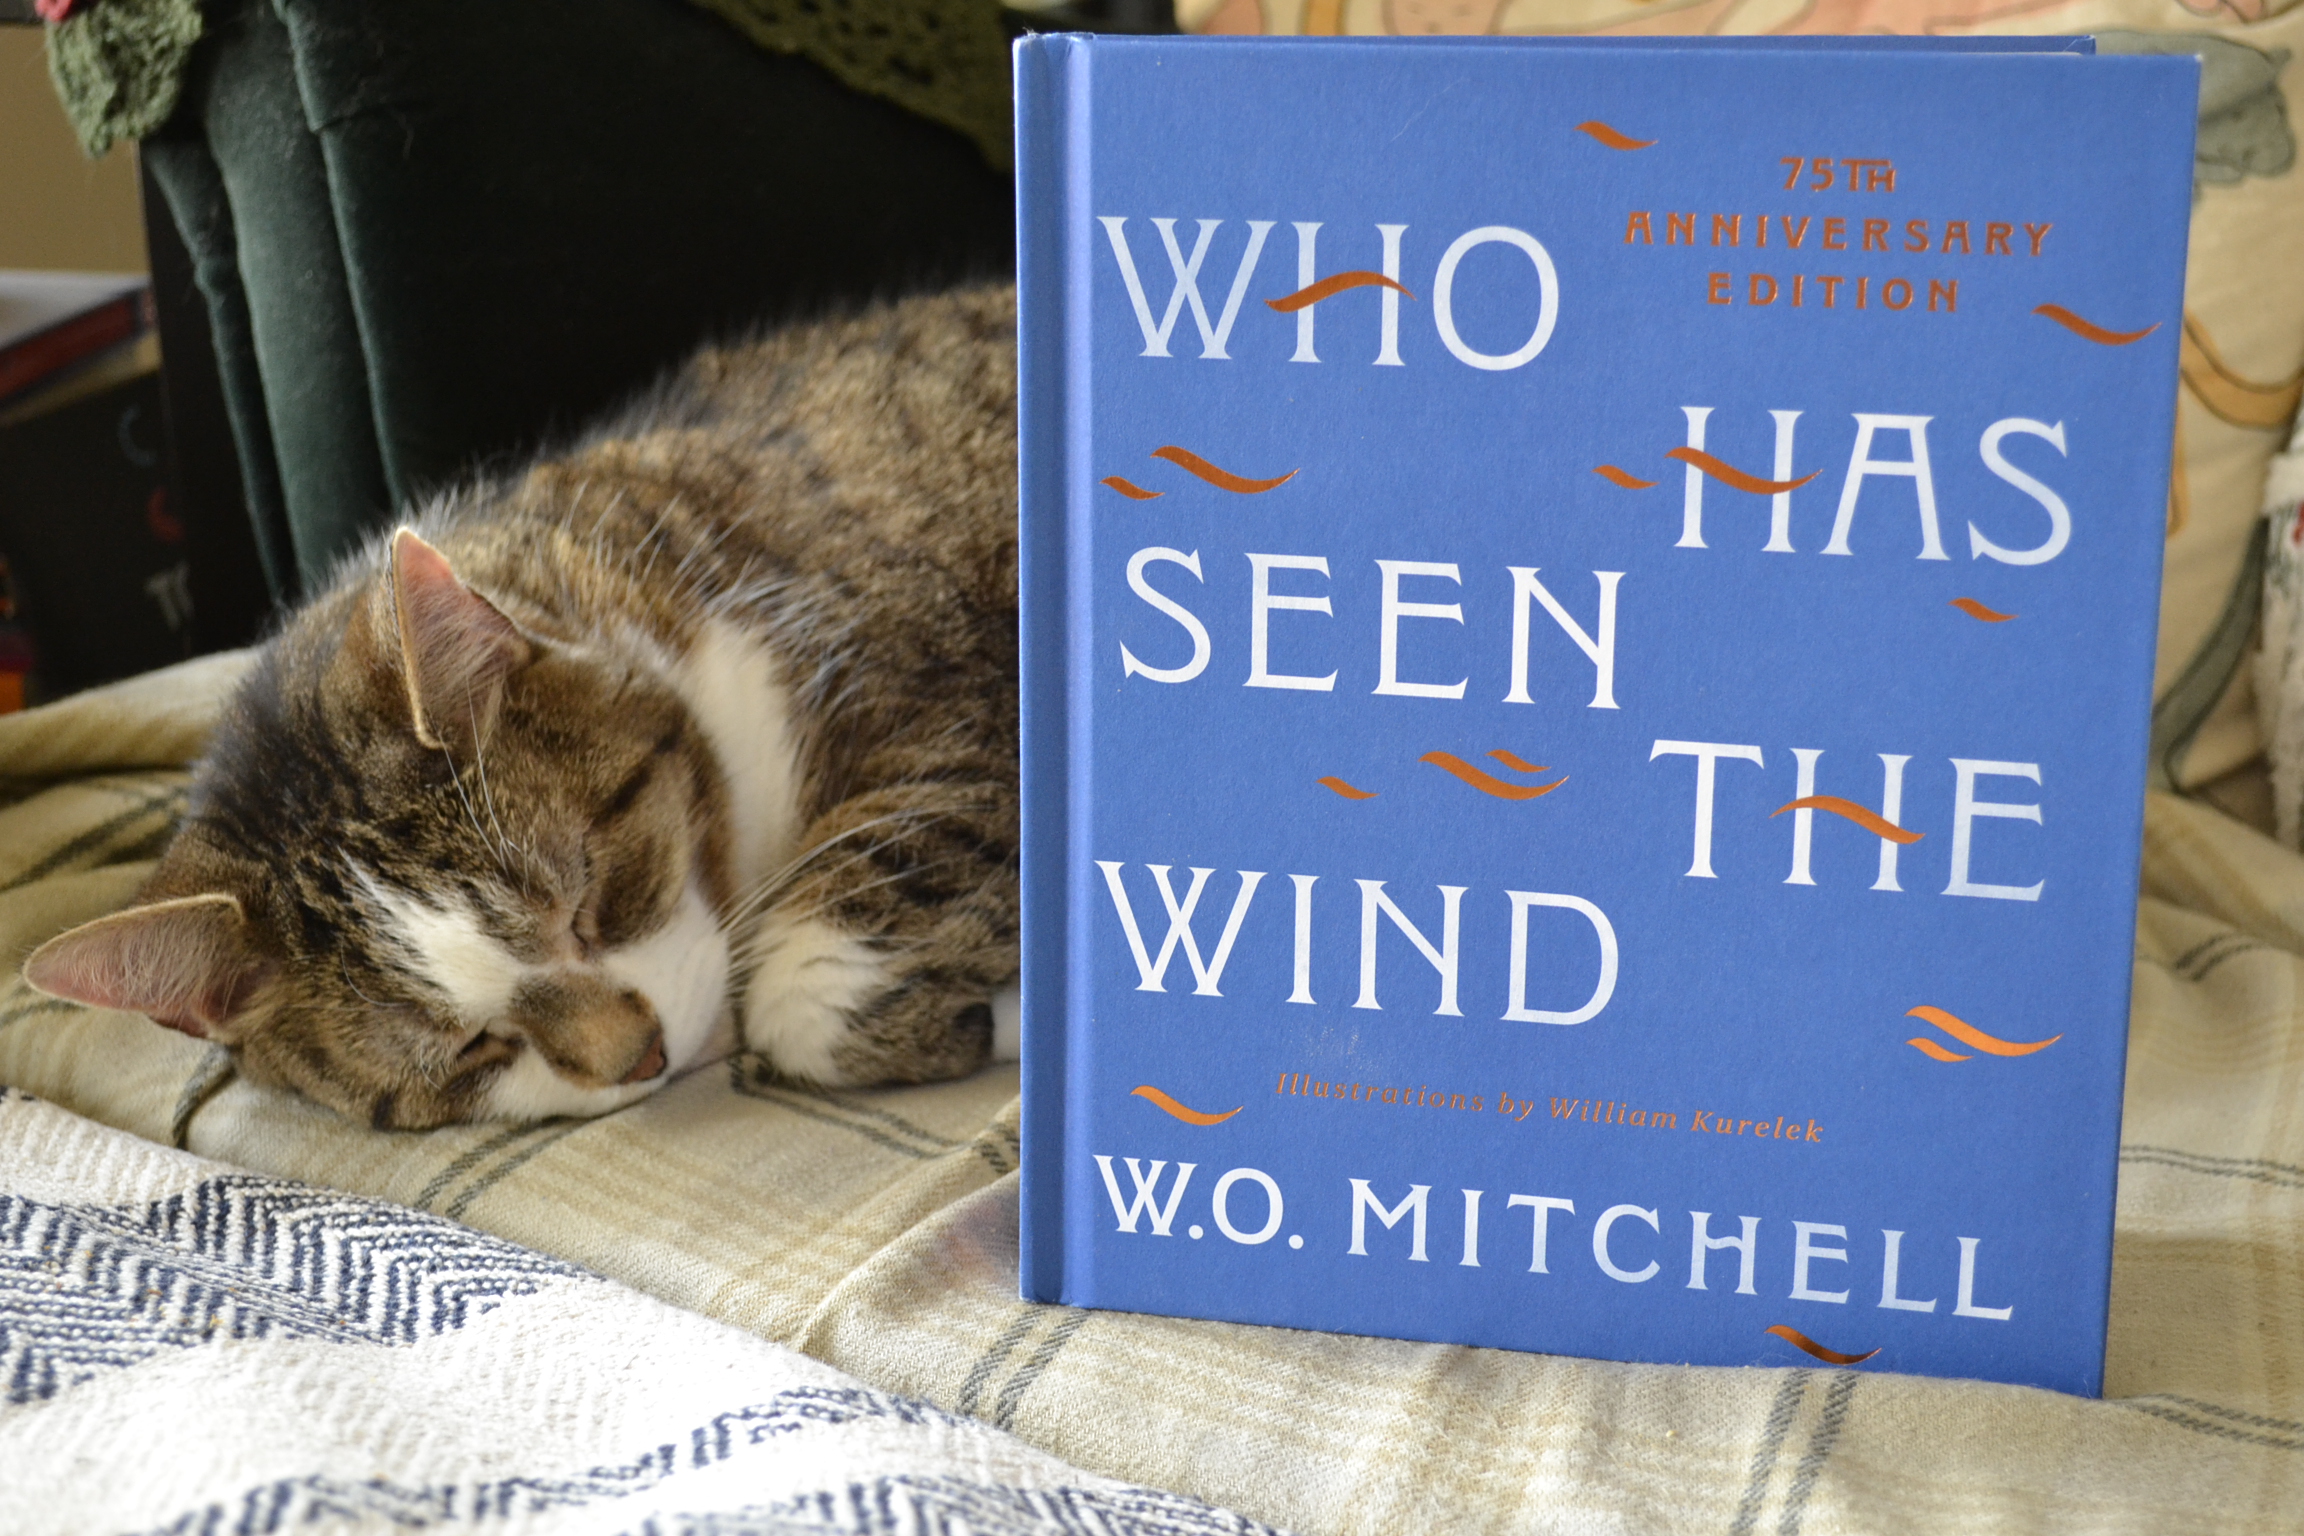 A tabby cat is sleeping contently behind a bright blue edition of Who Has Seen the Wind.